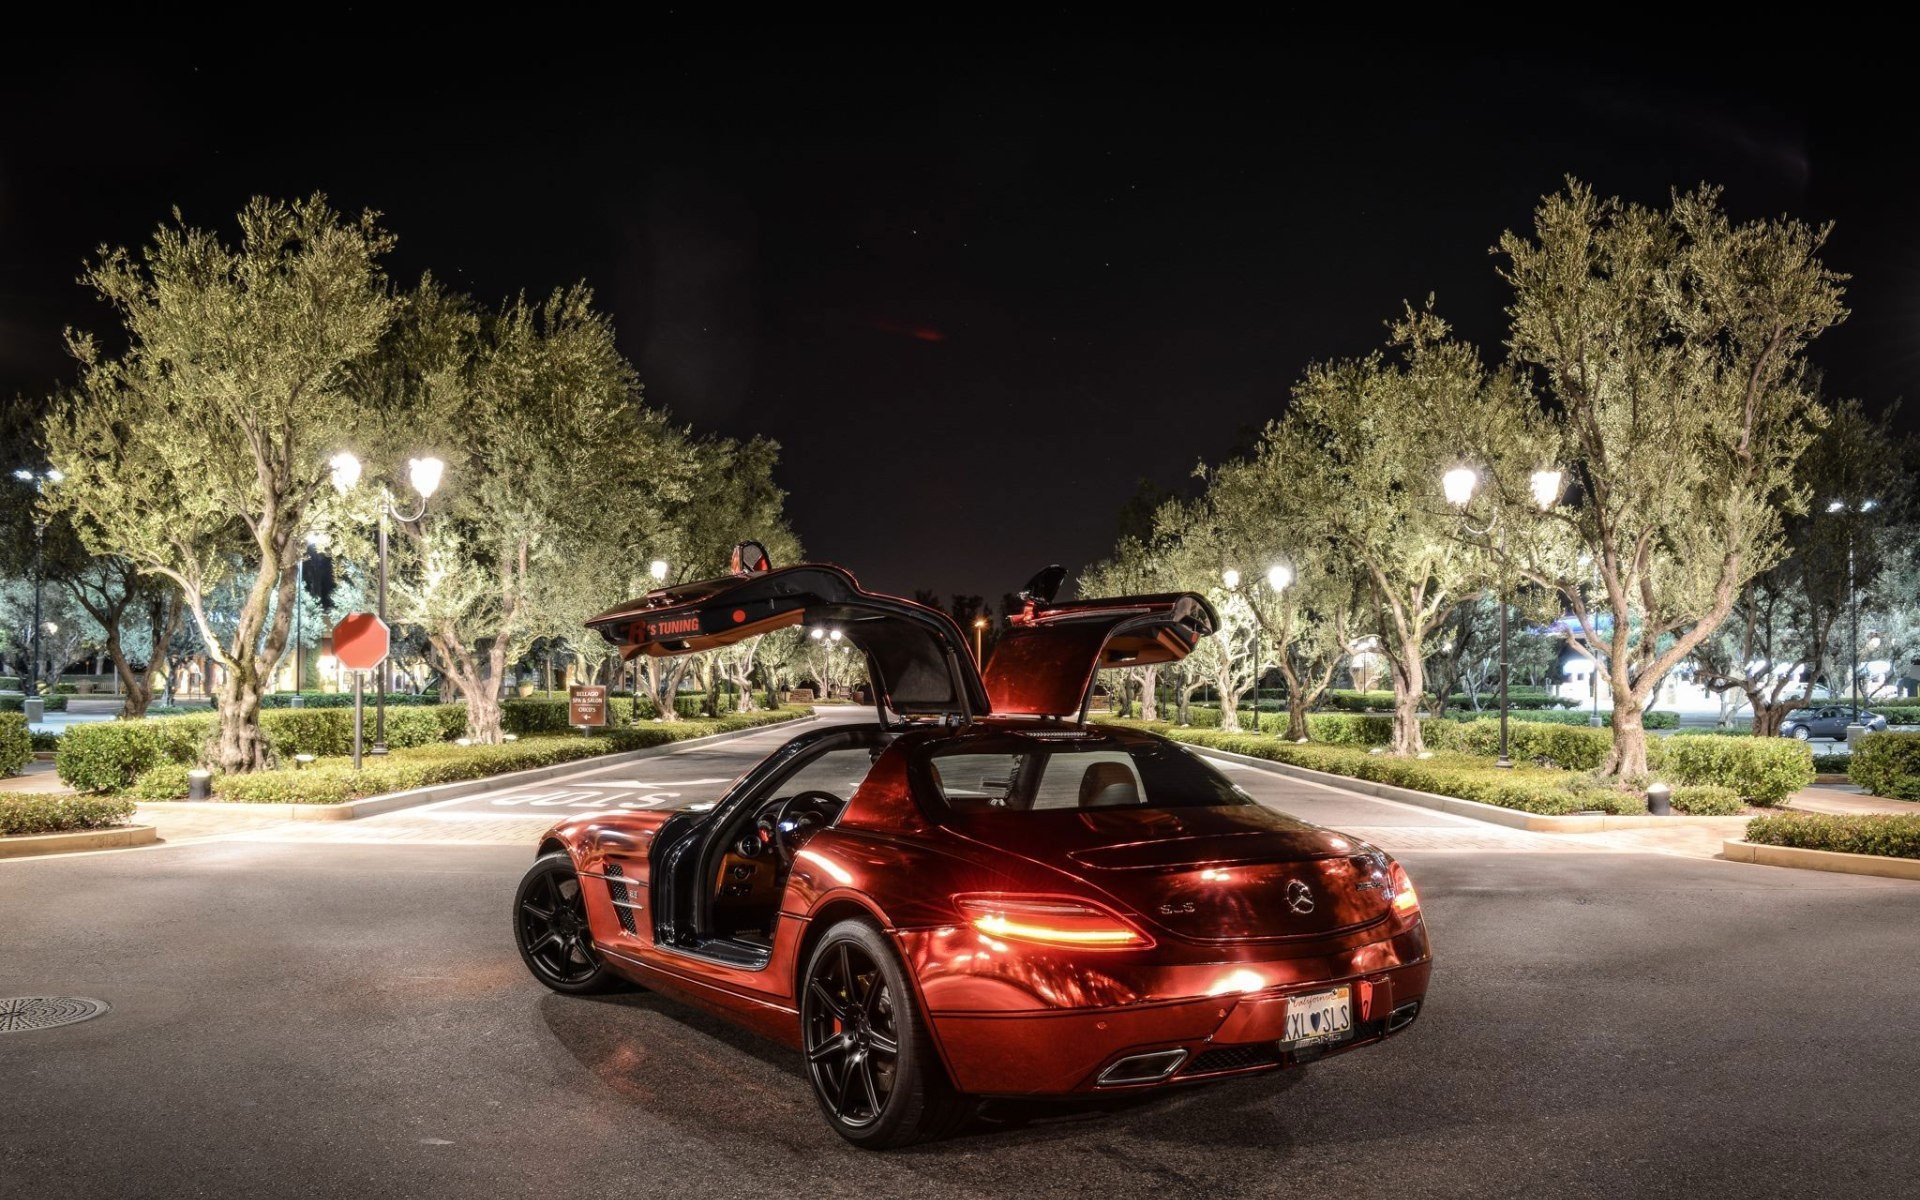 red, Night, Cars, Mercedes benz, Sls, Amg, Mercedes, Benz, Mercedes, Benz, Sls, Mercedes, Benz, Sls, Amg, Rear, Angle, View Wallpaper